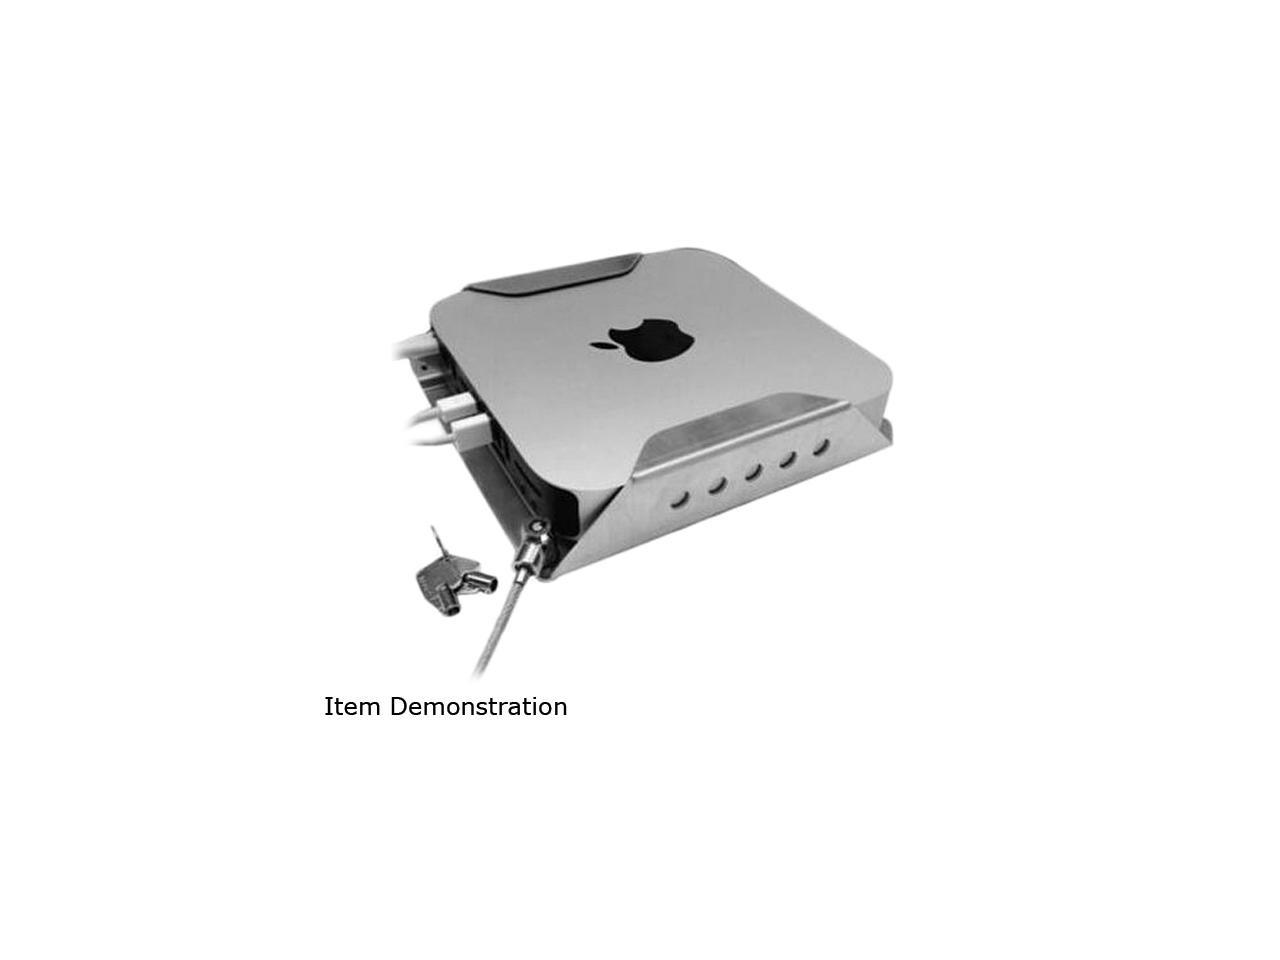 New Maclocks Mac Mini Security Mount Enclosure With cable lock MMEN76 